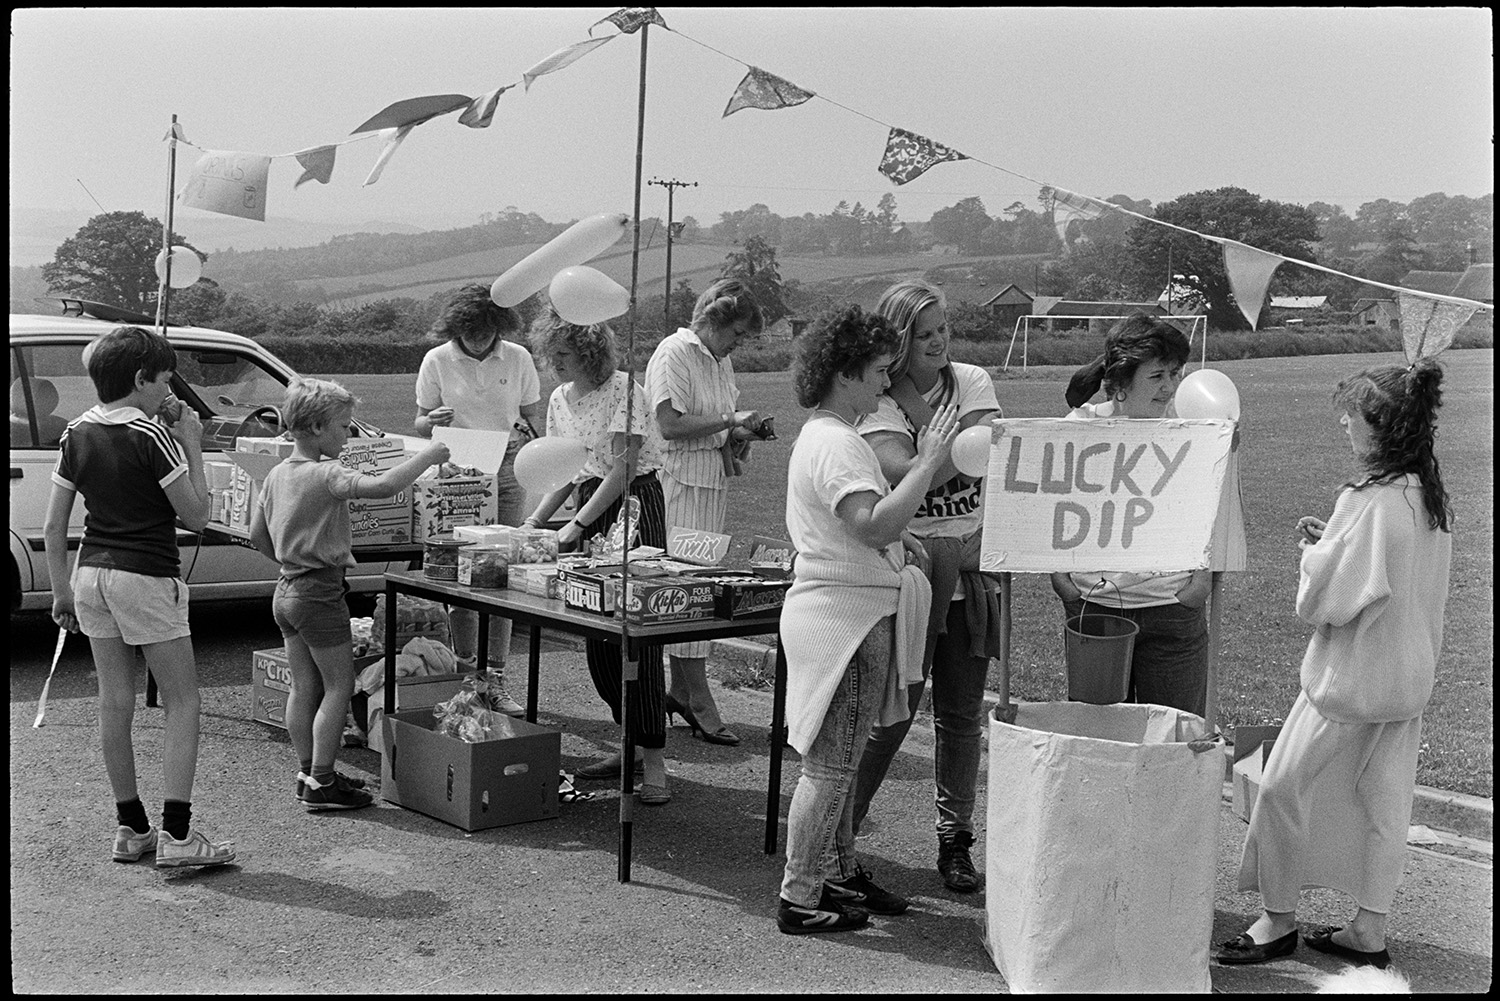 School Fete, stalls.
[A stall selling chocolates and snacks, alongside a Lucky Dip game, at the School Fete at Chulmleigh Community College. There are bunting and balloons around the stall, with the school playing fields and a wooded landscape in the background. Children and adults are gathered around and running the stalls.]